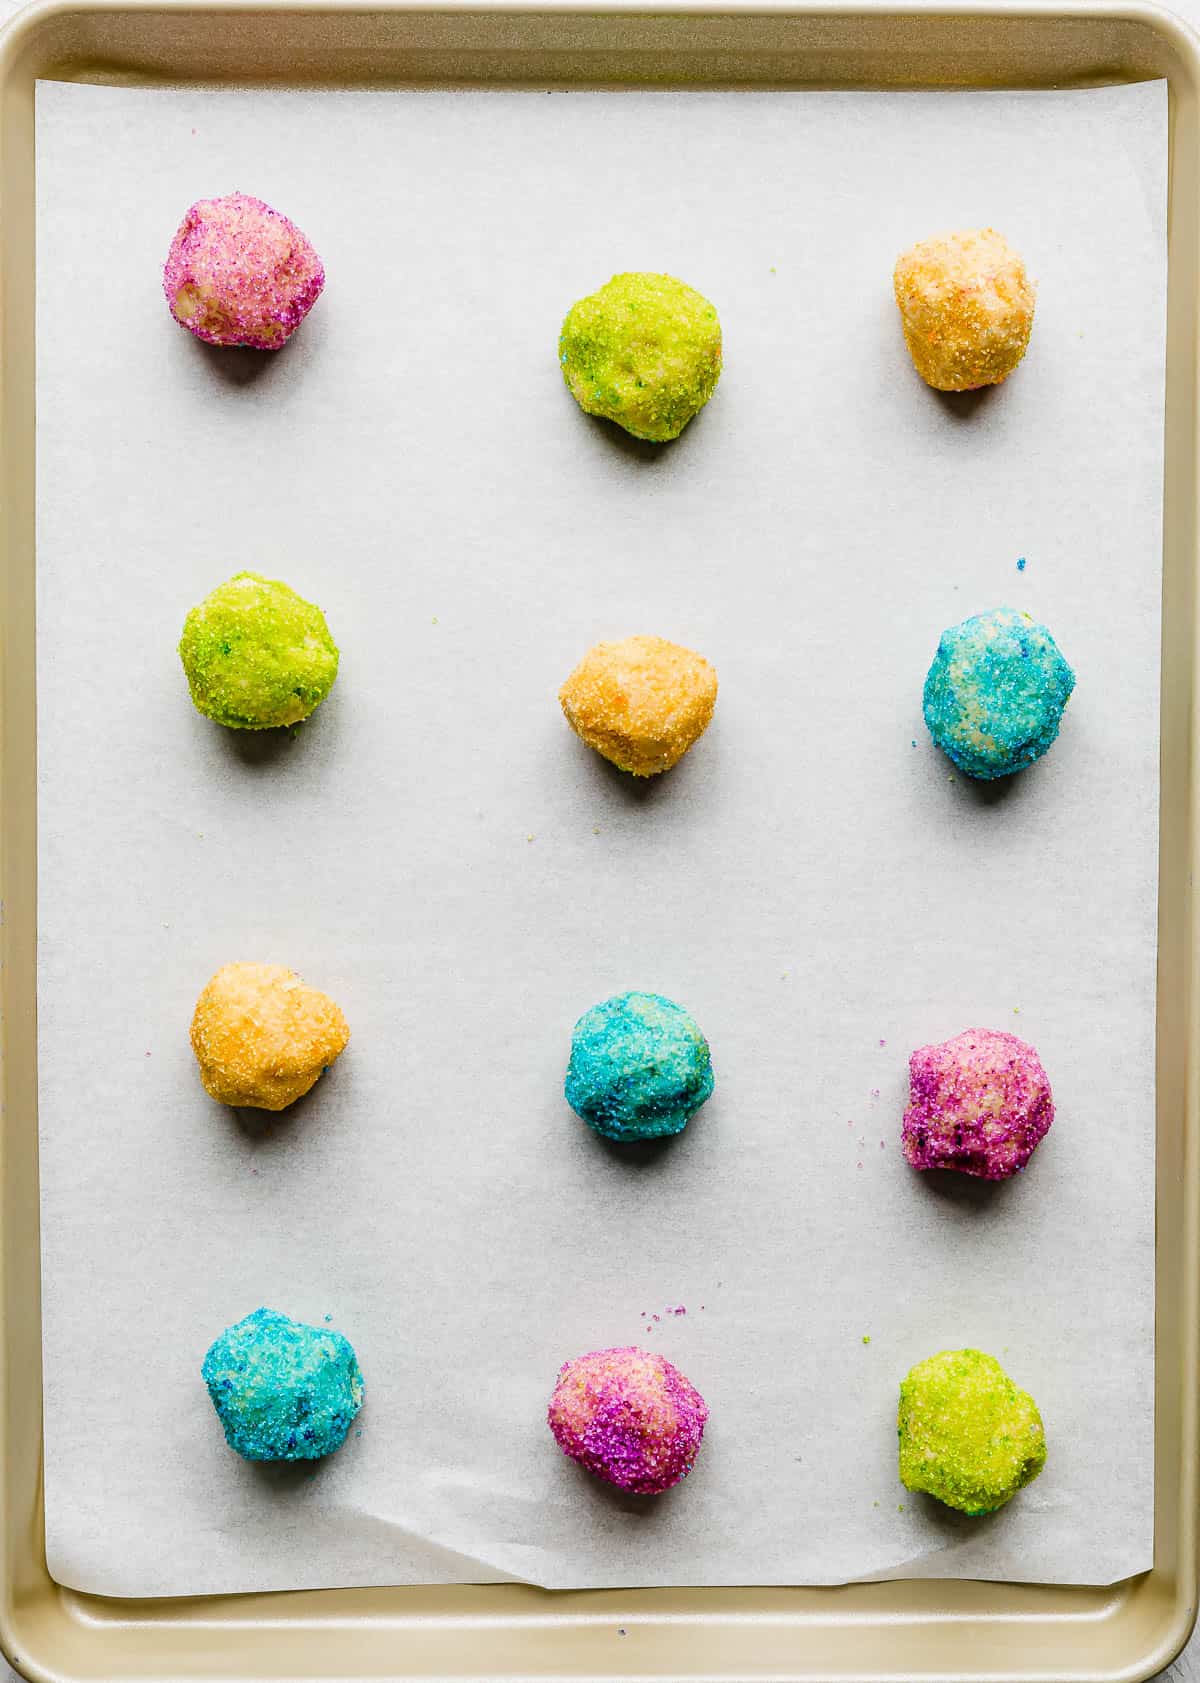 Cookie dough balls covered in colored sugar or fine sprinkles.